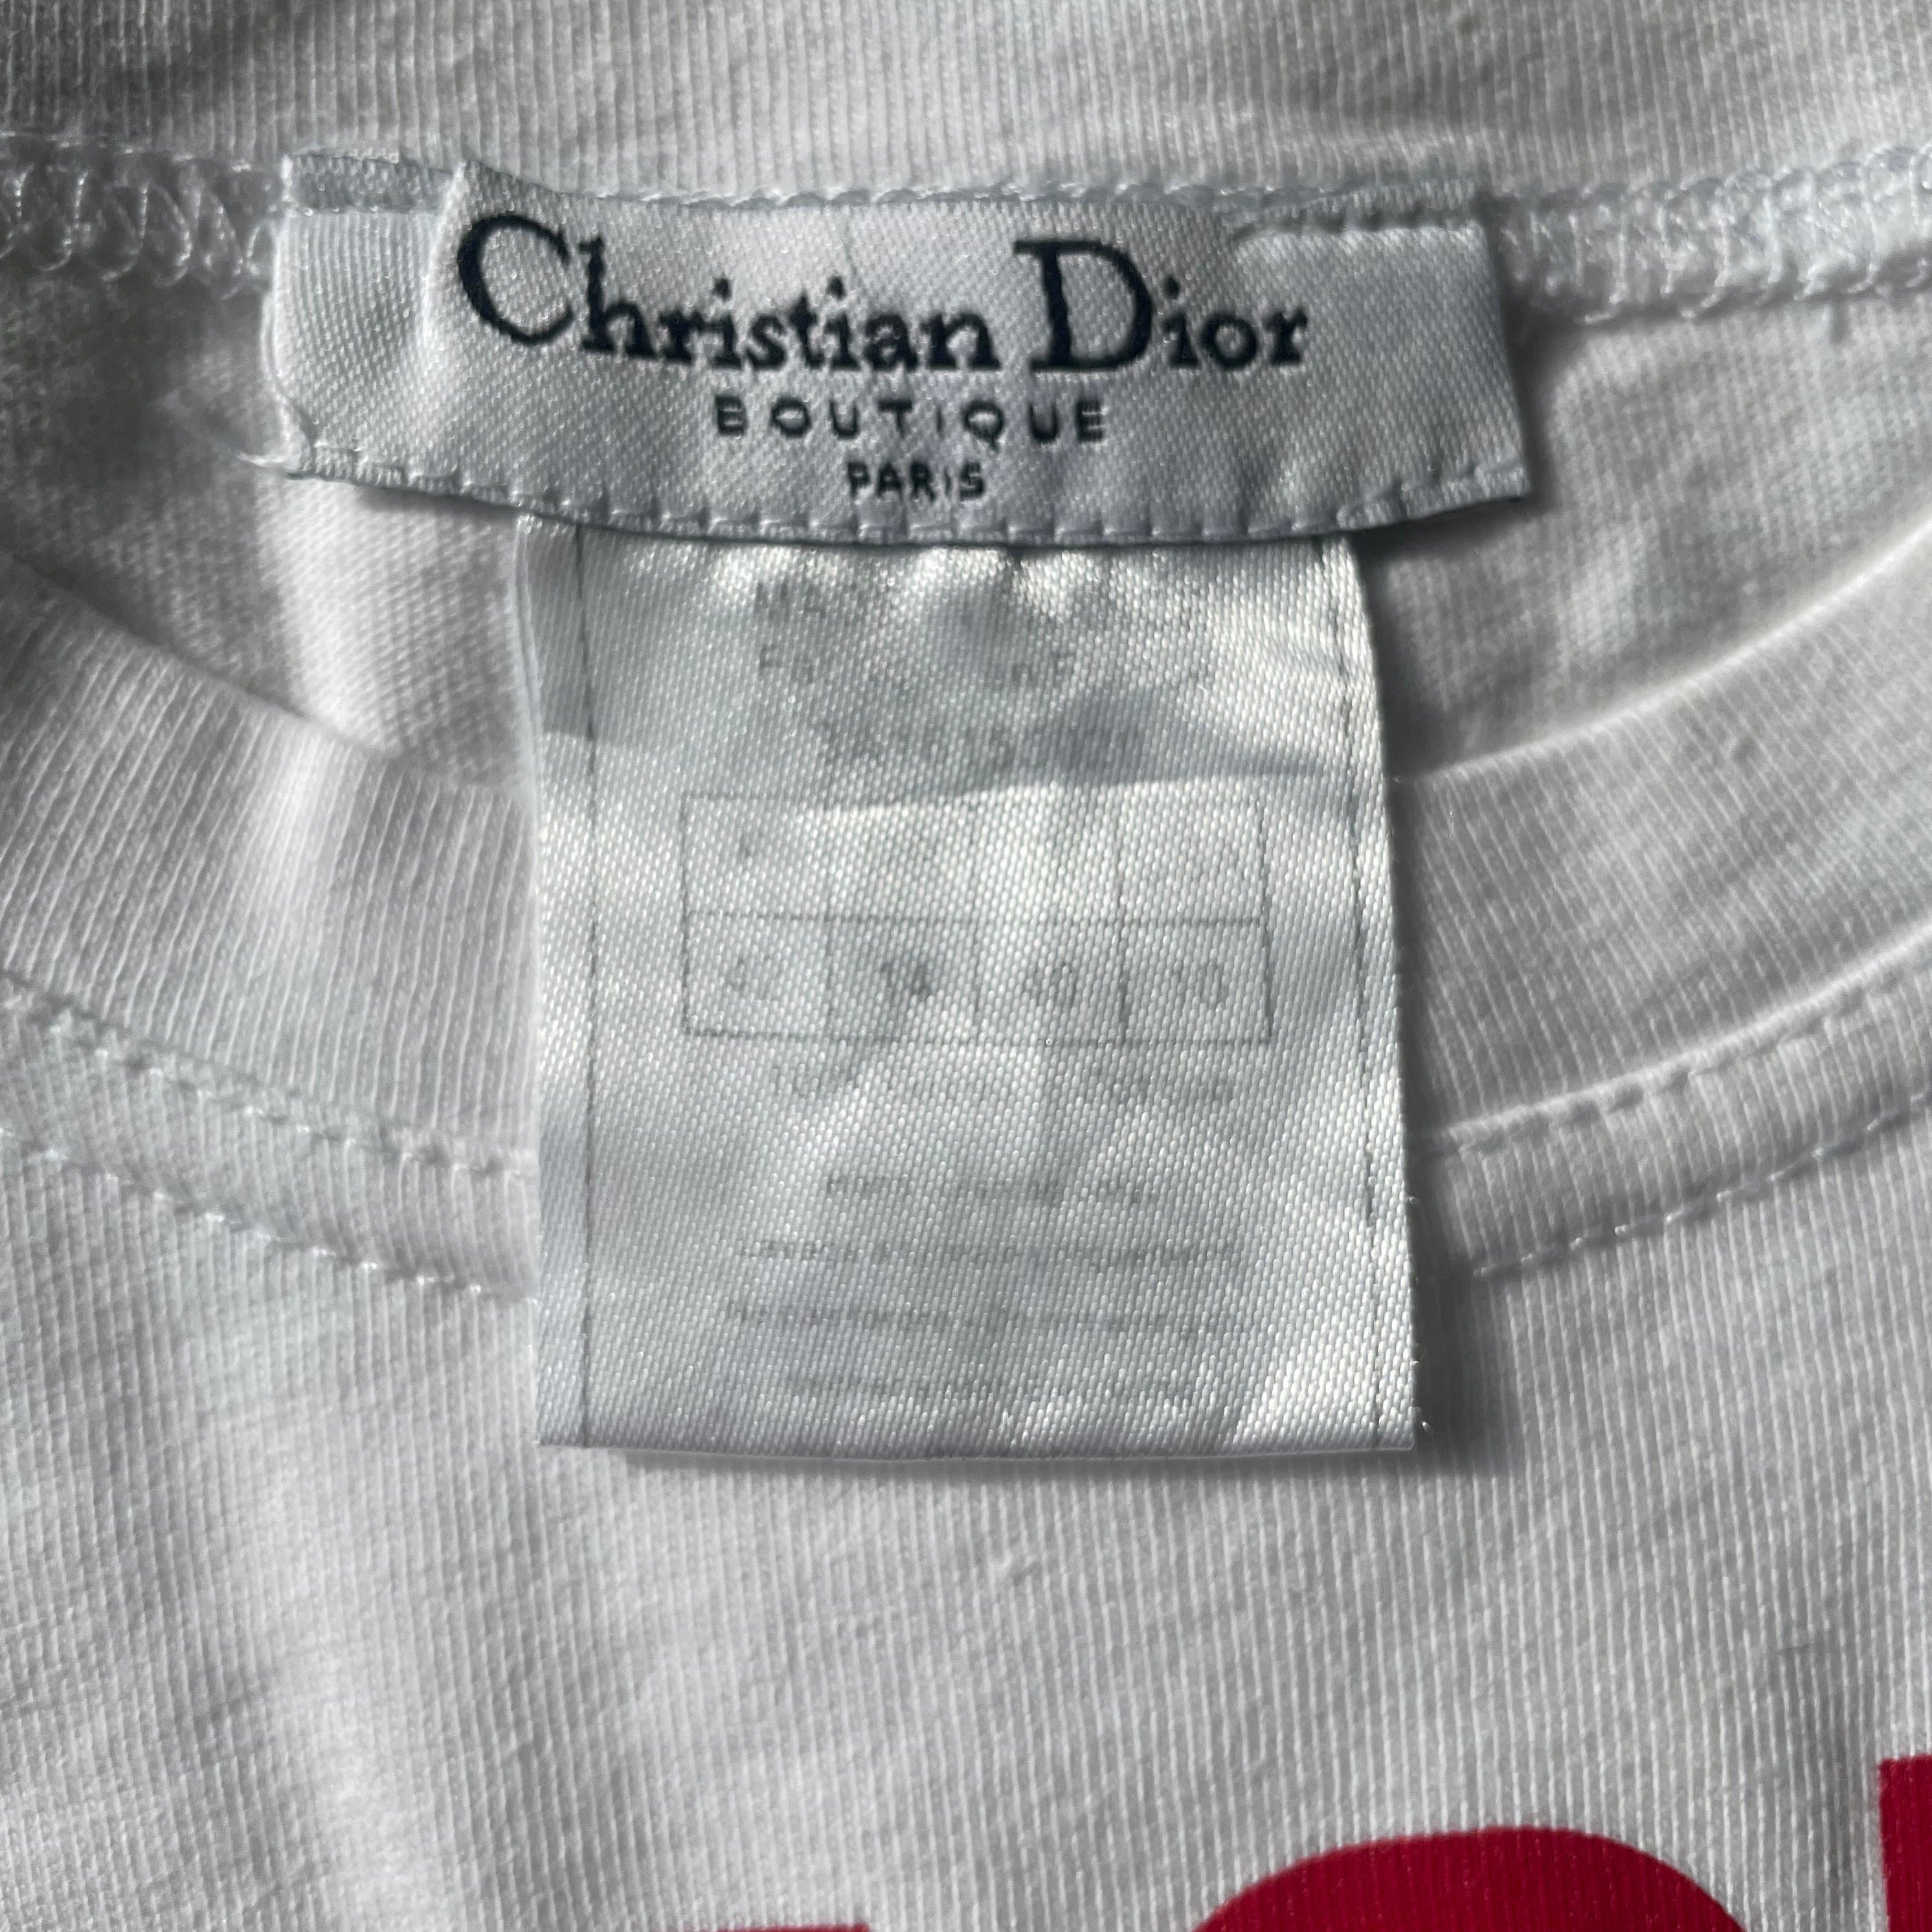 Christian Dior The Latest Blonde T-SHIRT by John Galliano